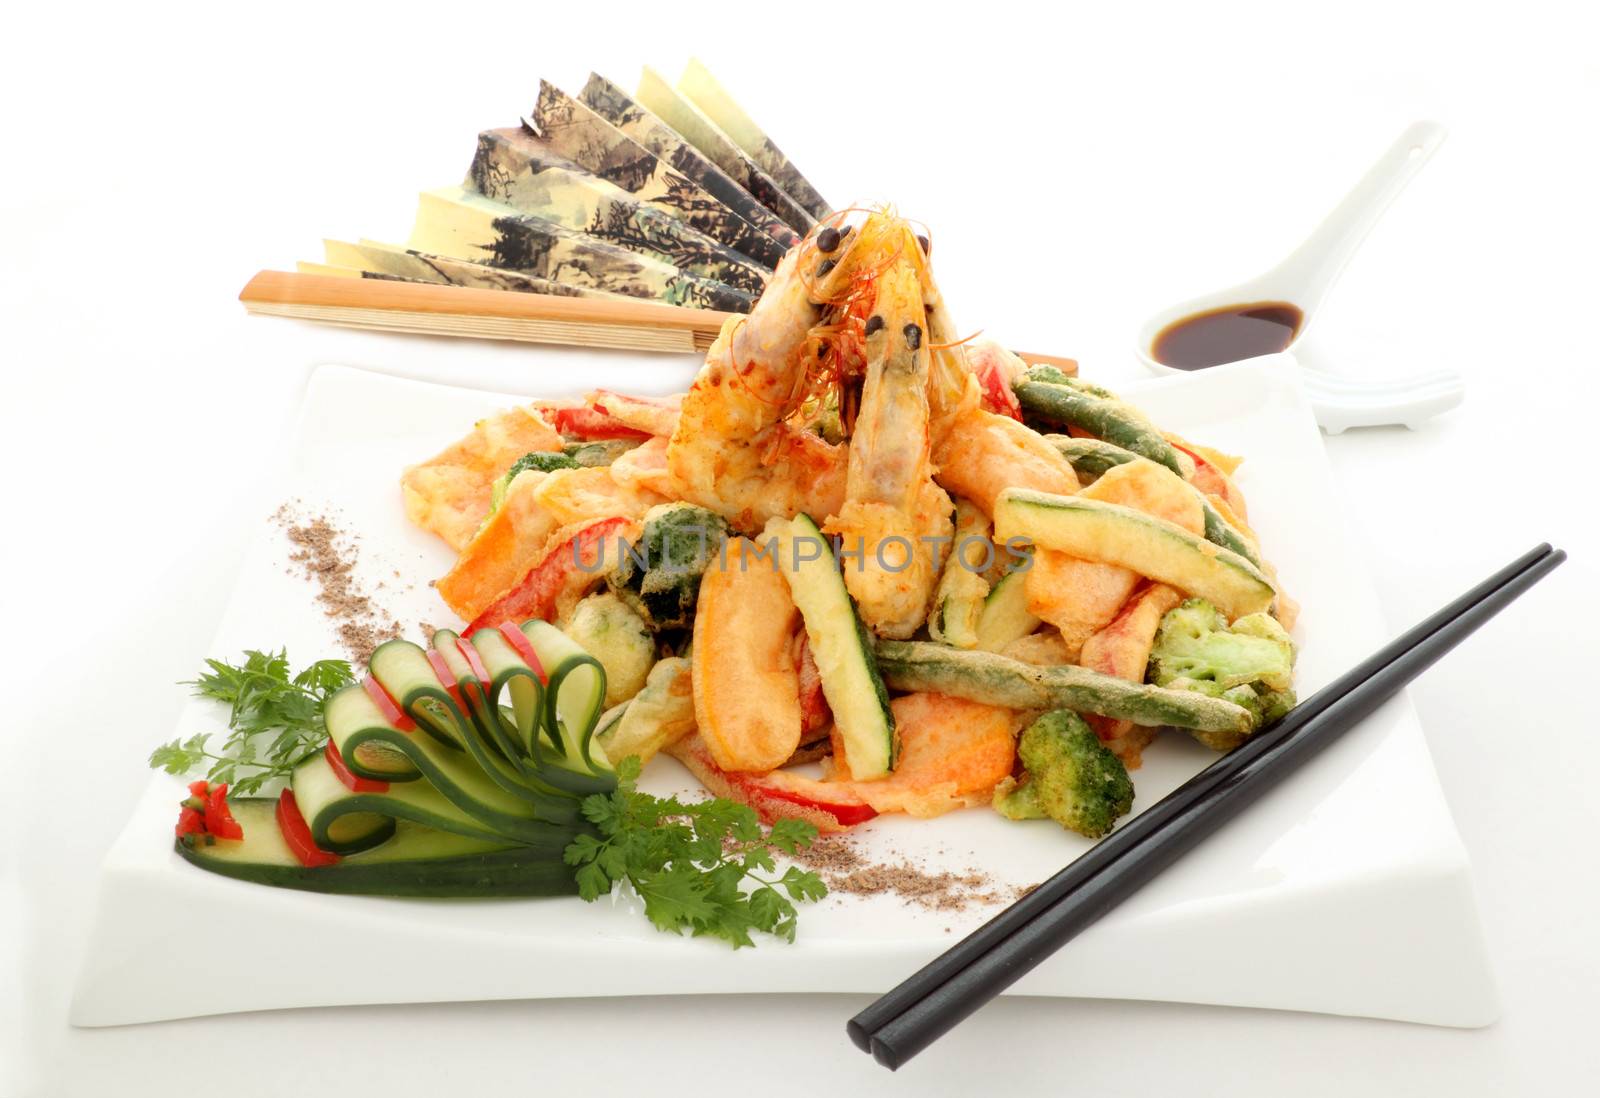 Japanese fried tempura with shrimp and vegetables with zucchini garnish.